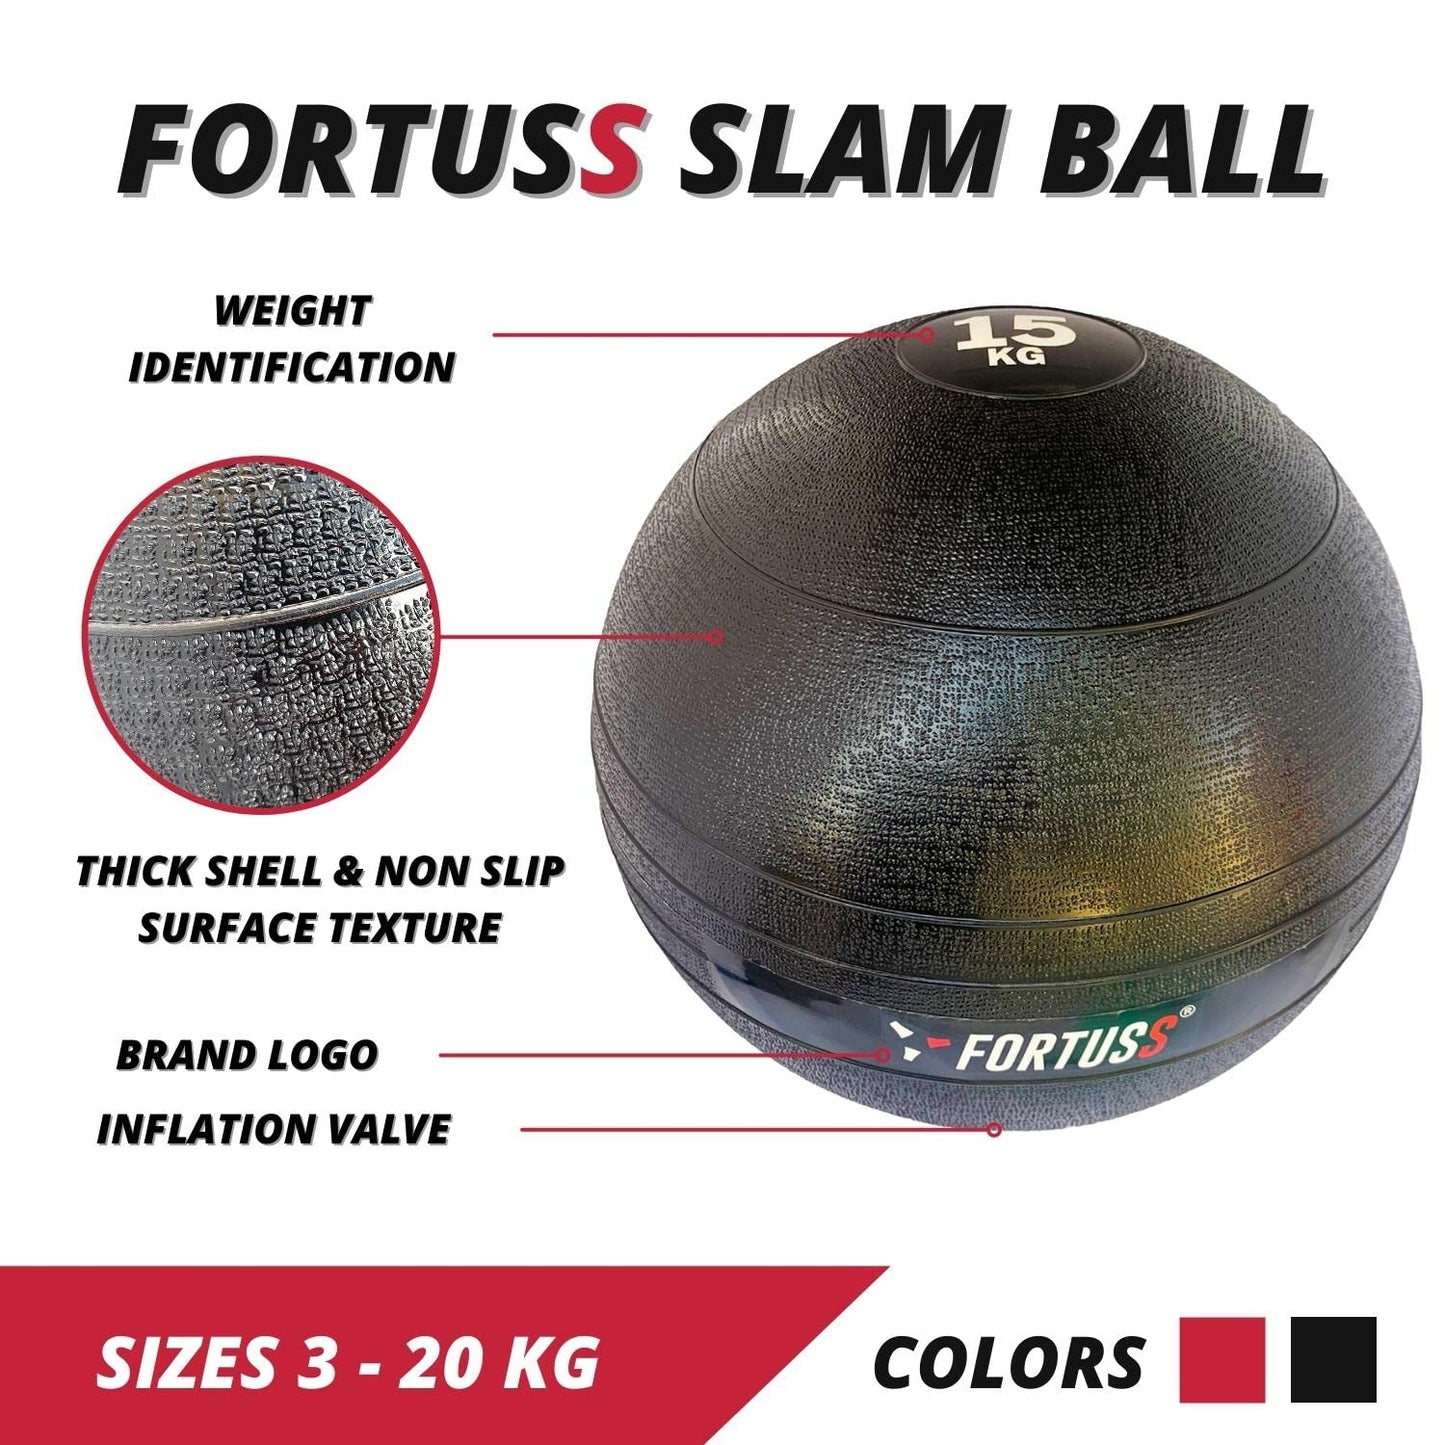 FORTUSS Slam Ball 7 KG Black - Heavy Duty No Bounce Exercise Medicine Ball - Weighted Ball for Strength, Conditioning, HIIT, Crossfit Training - Workout Equipment for Home & Gym Use | 3 – 20 KG Black